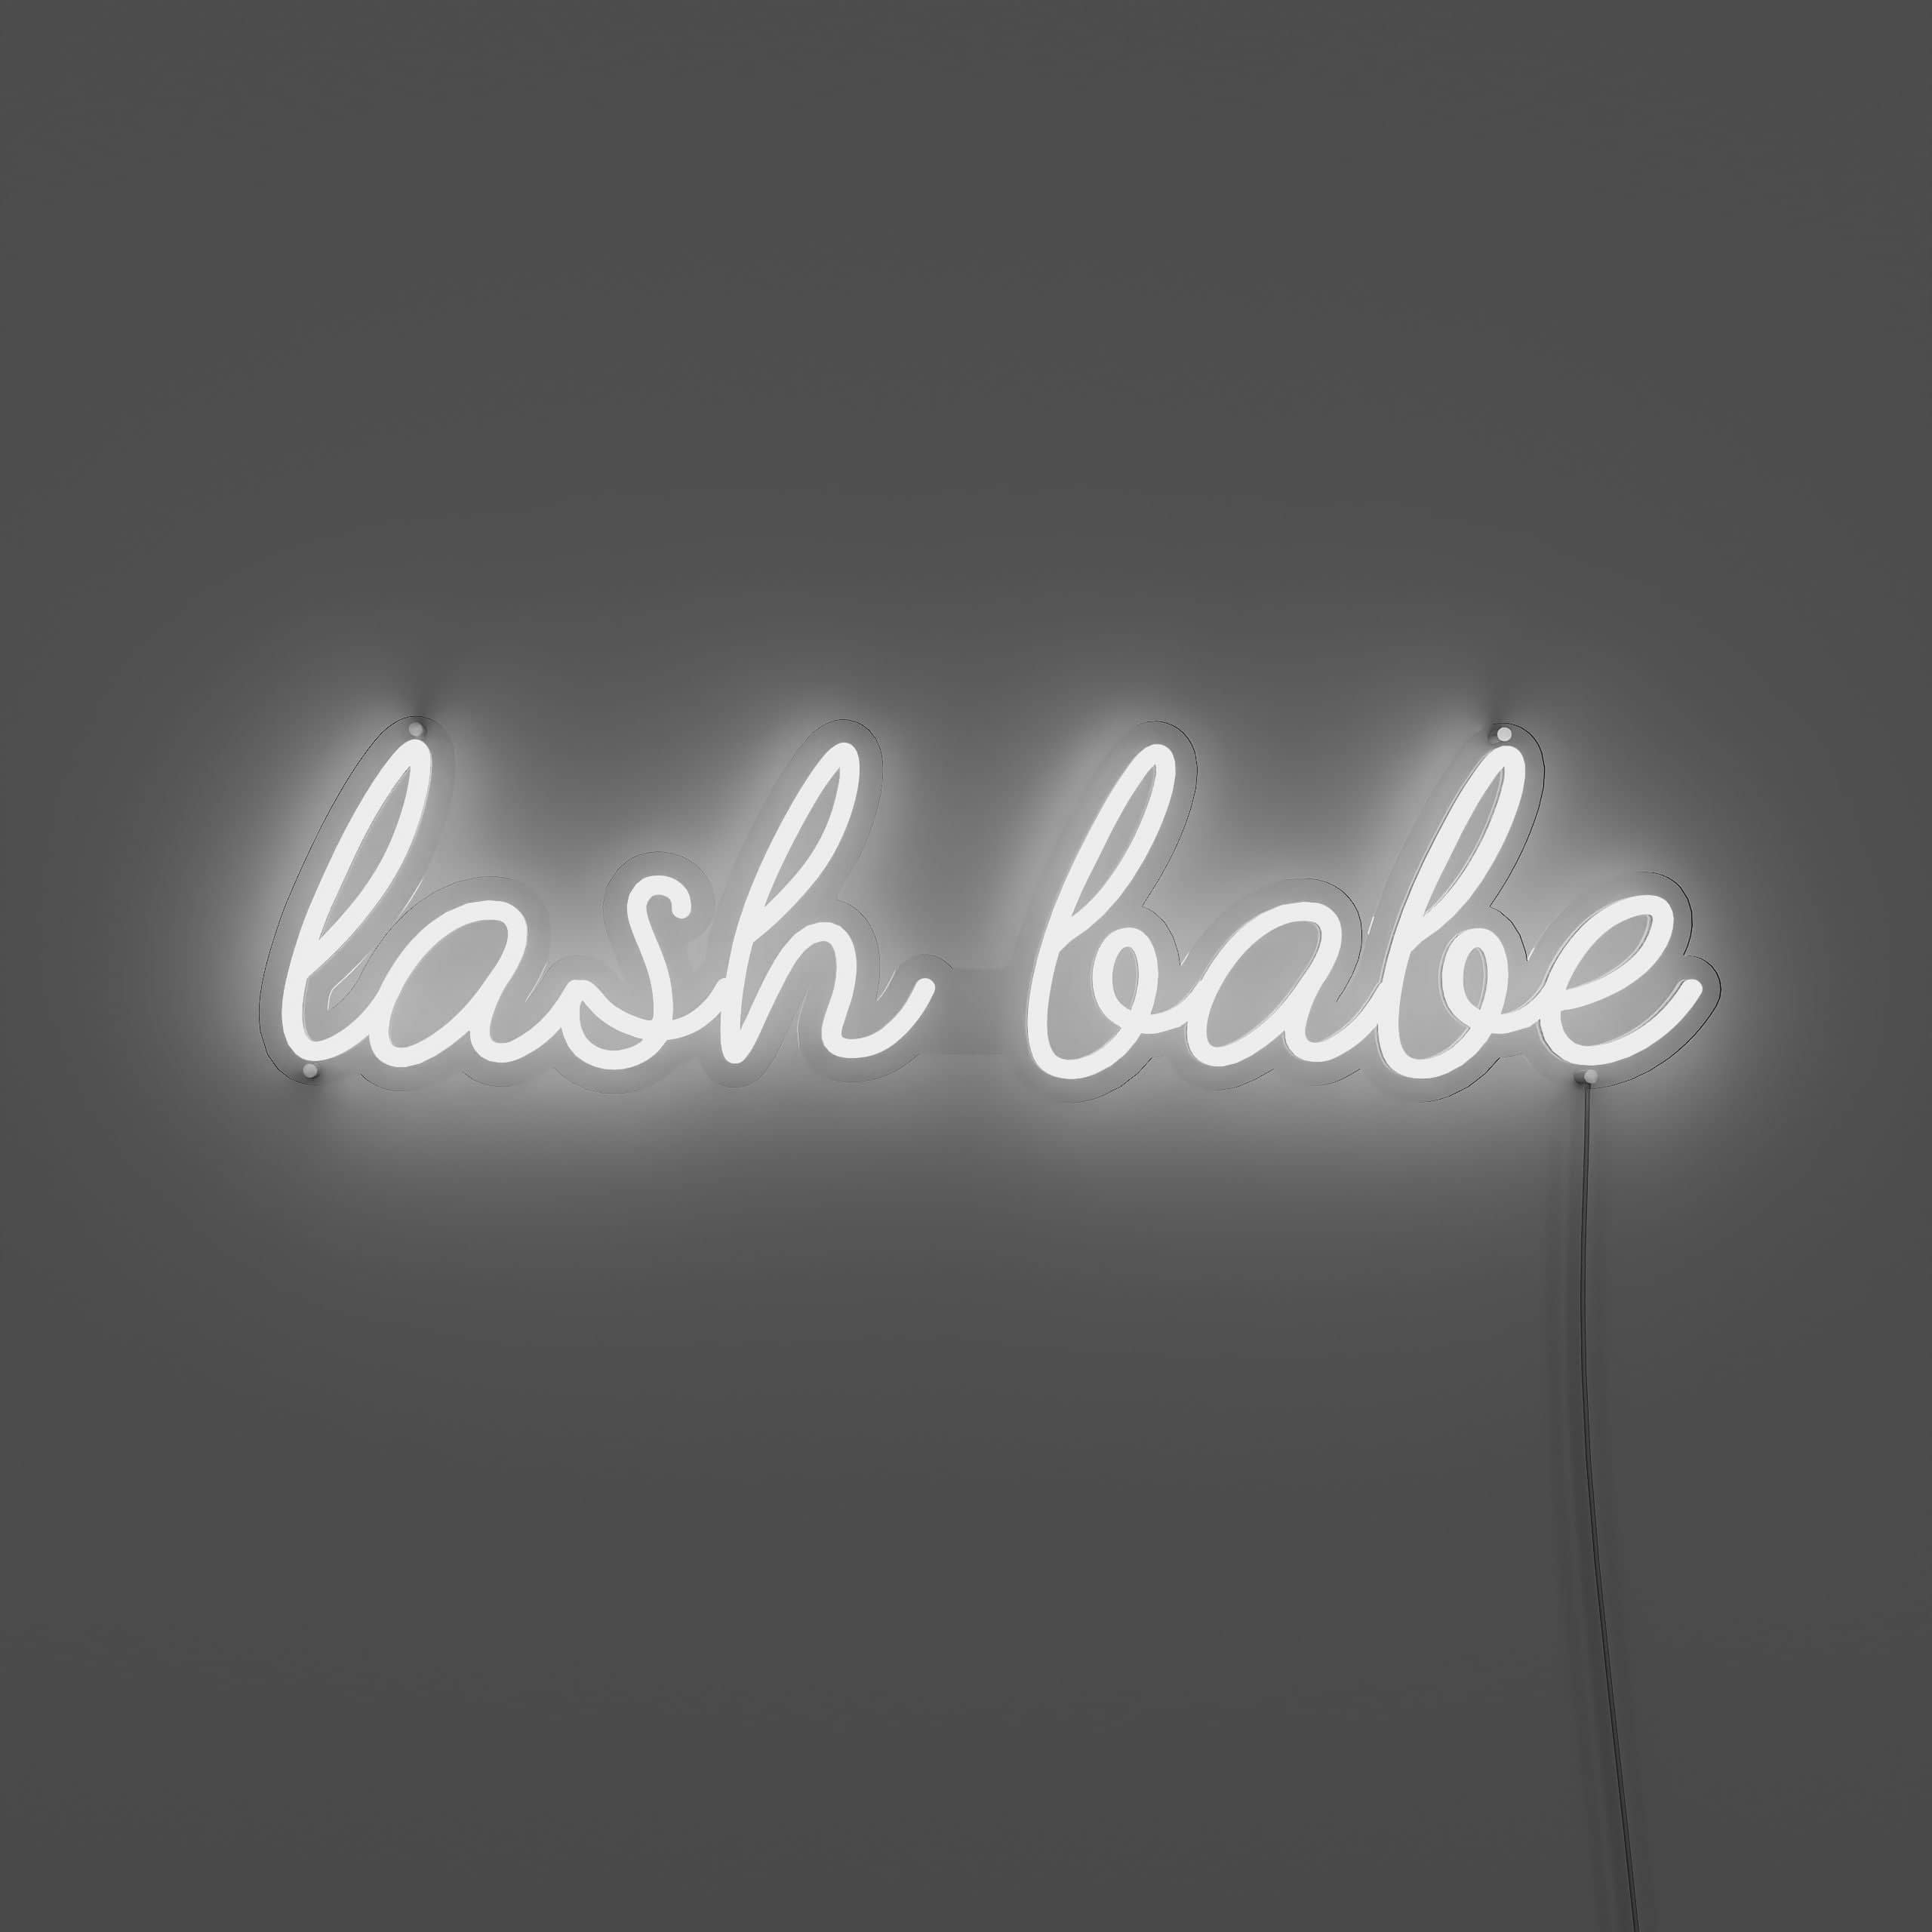 emphasize-your-eyes-with-fabulous-lashes!-neon-sign-lite